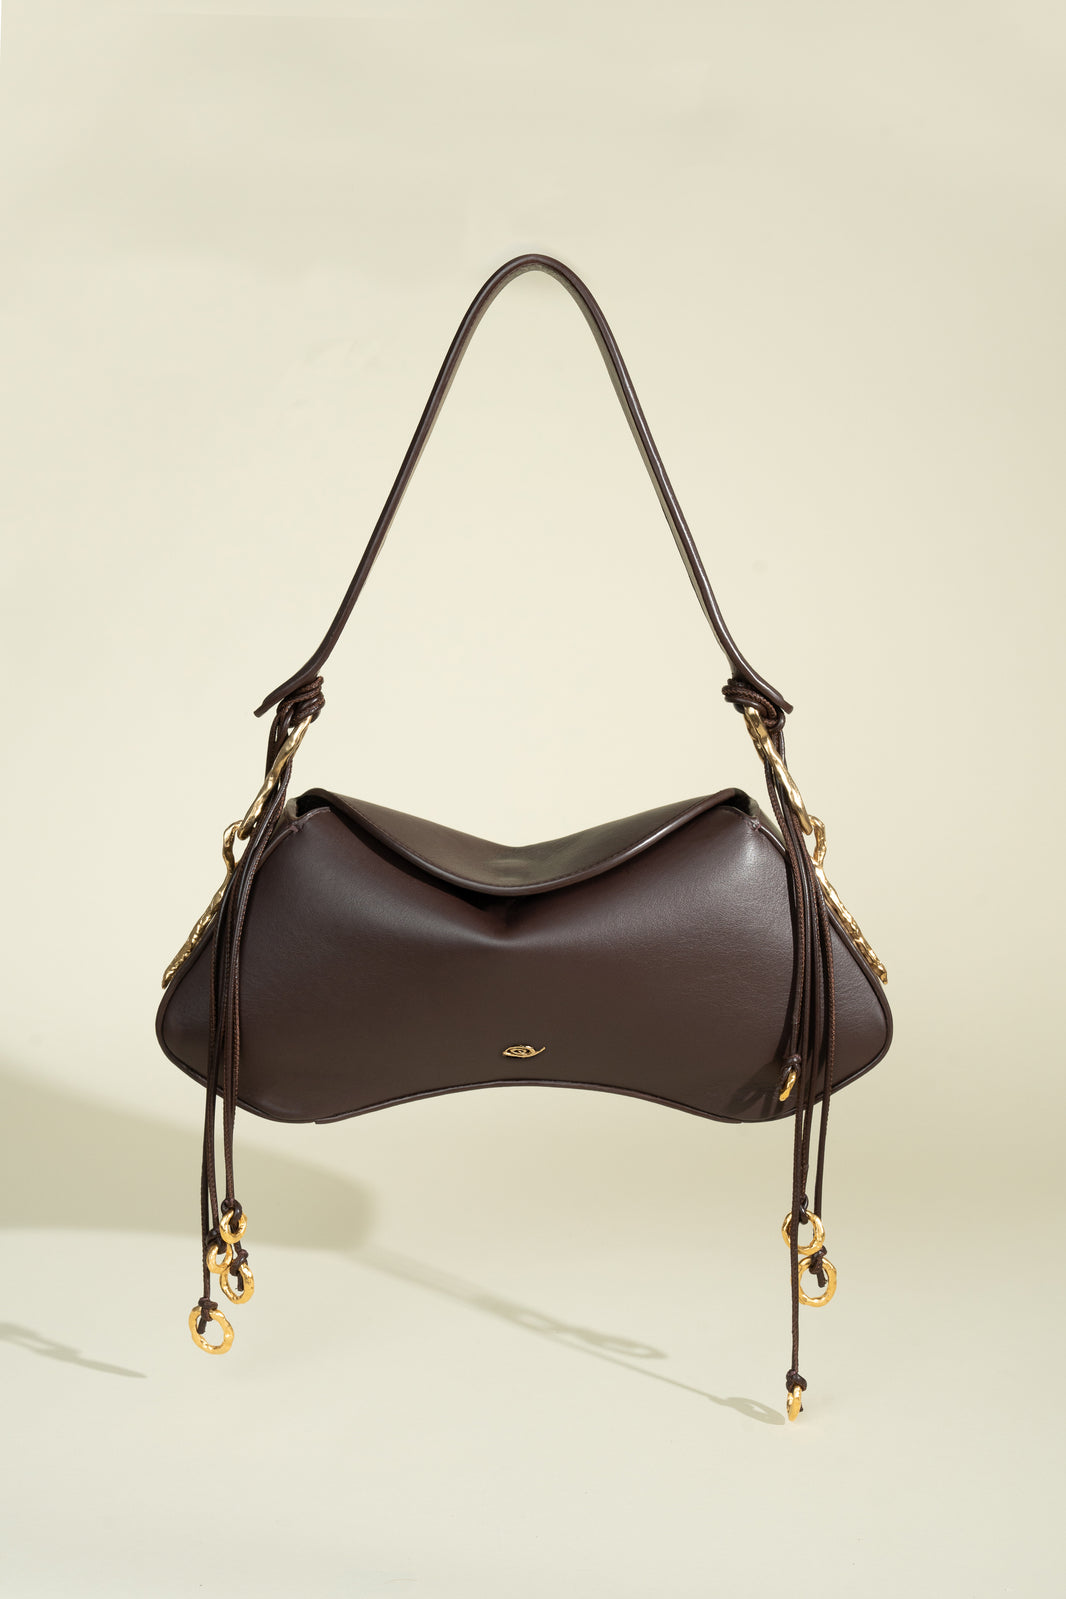  Deià handmade bag Nappa Leather Shoulder bag with Hanging Organic Rings senderkis dark chocolate front view